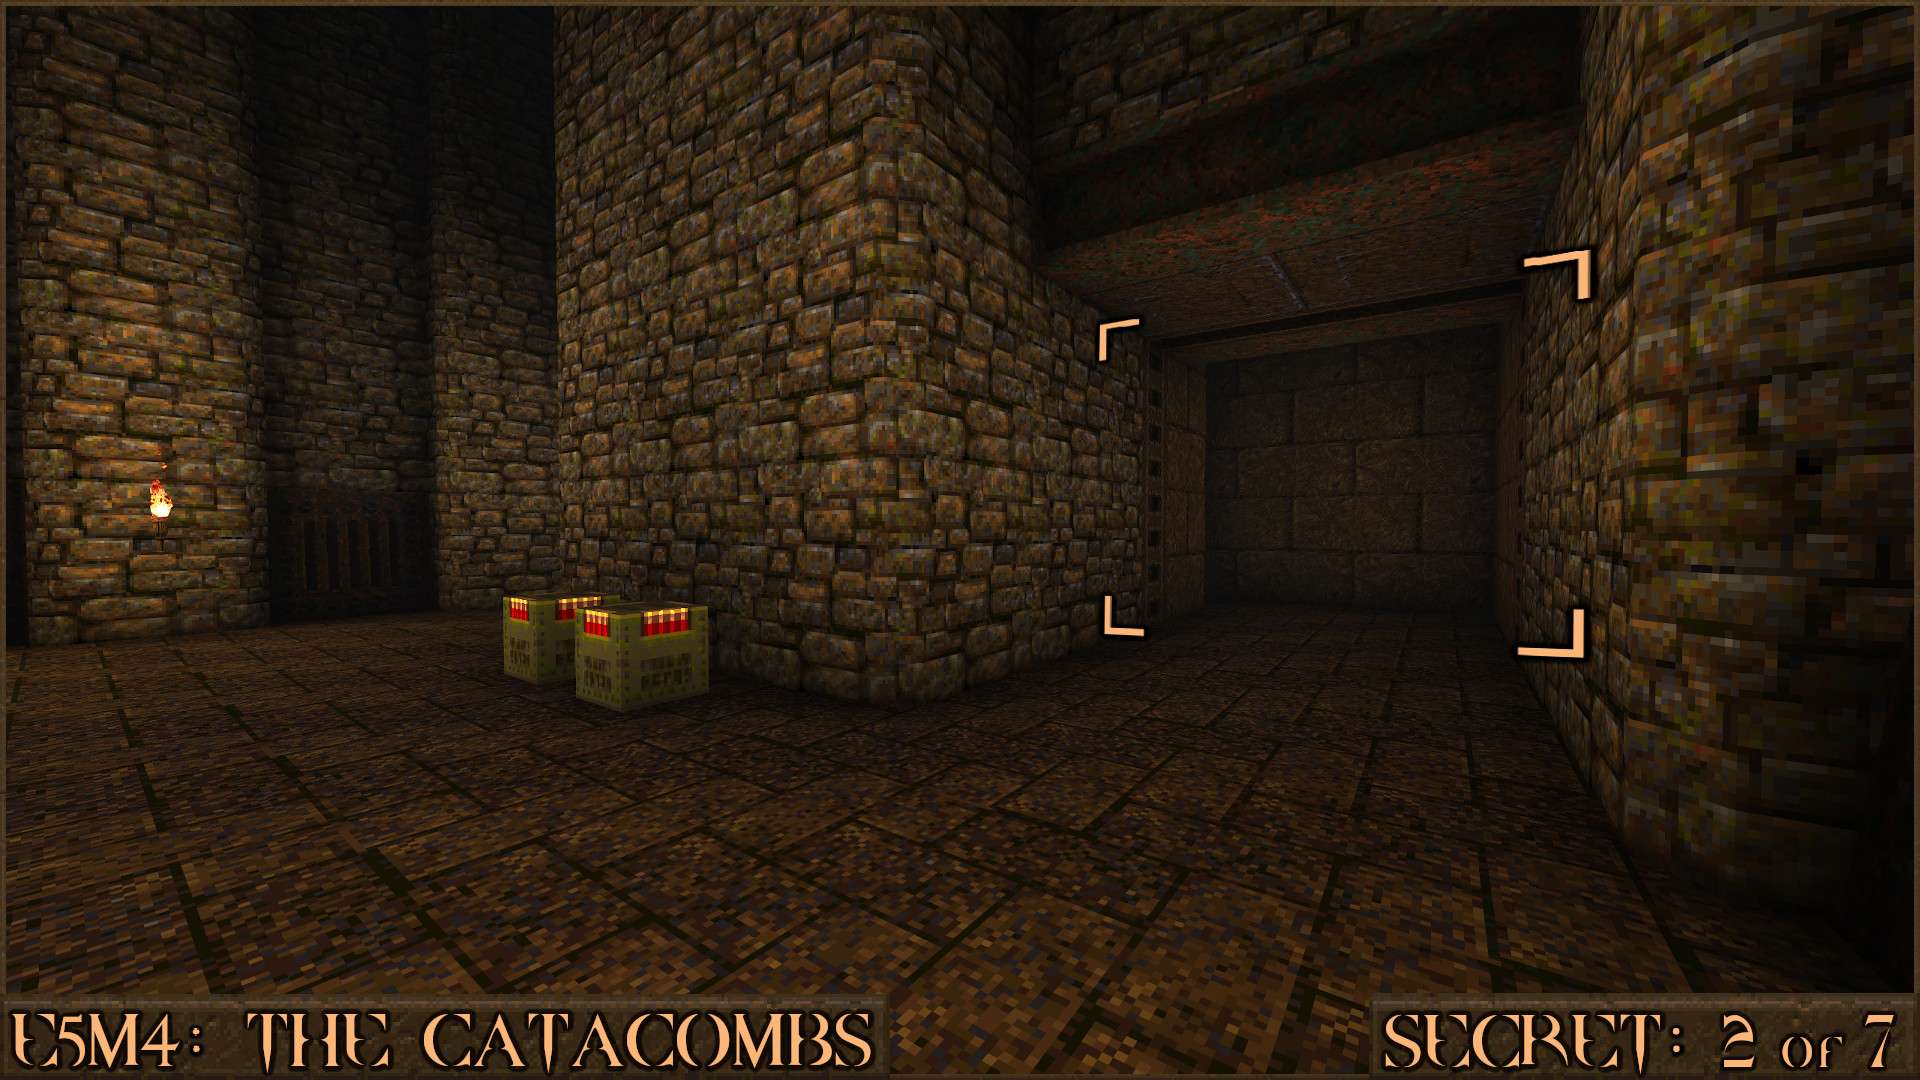 Quake Finding All Secrets in Quake Expansion pack: Dimension of the Past - E5M4: The Catacombs - 2D59199